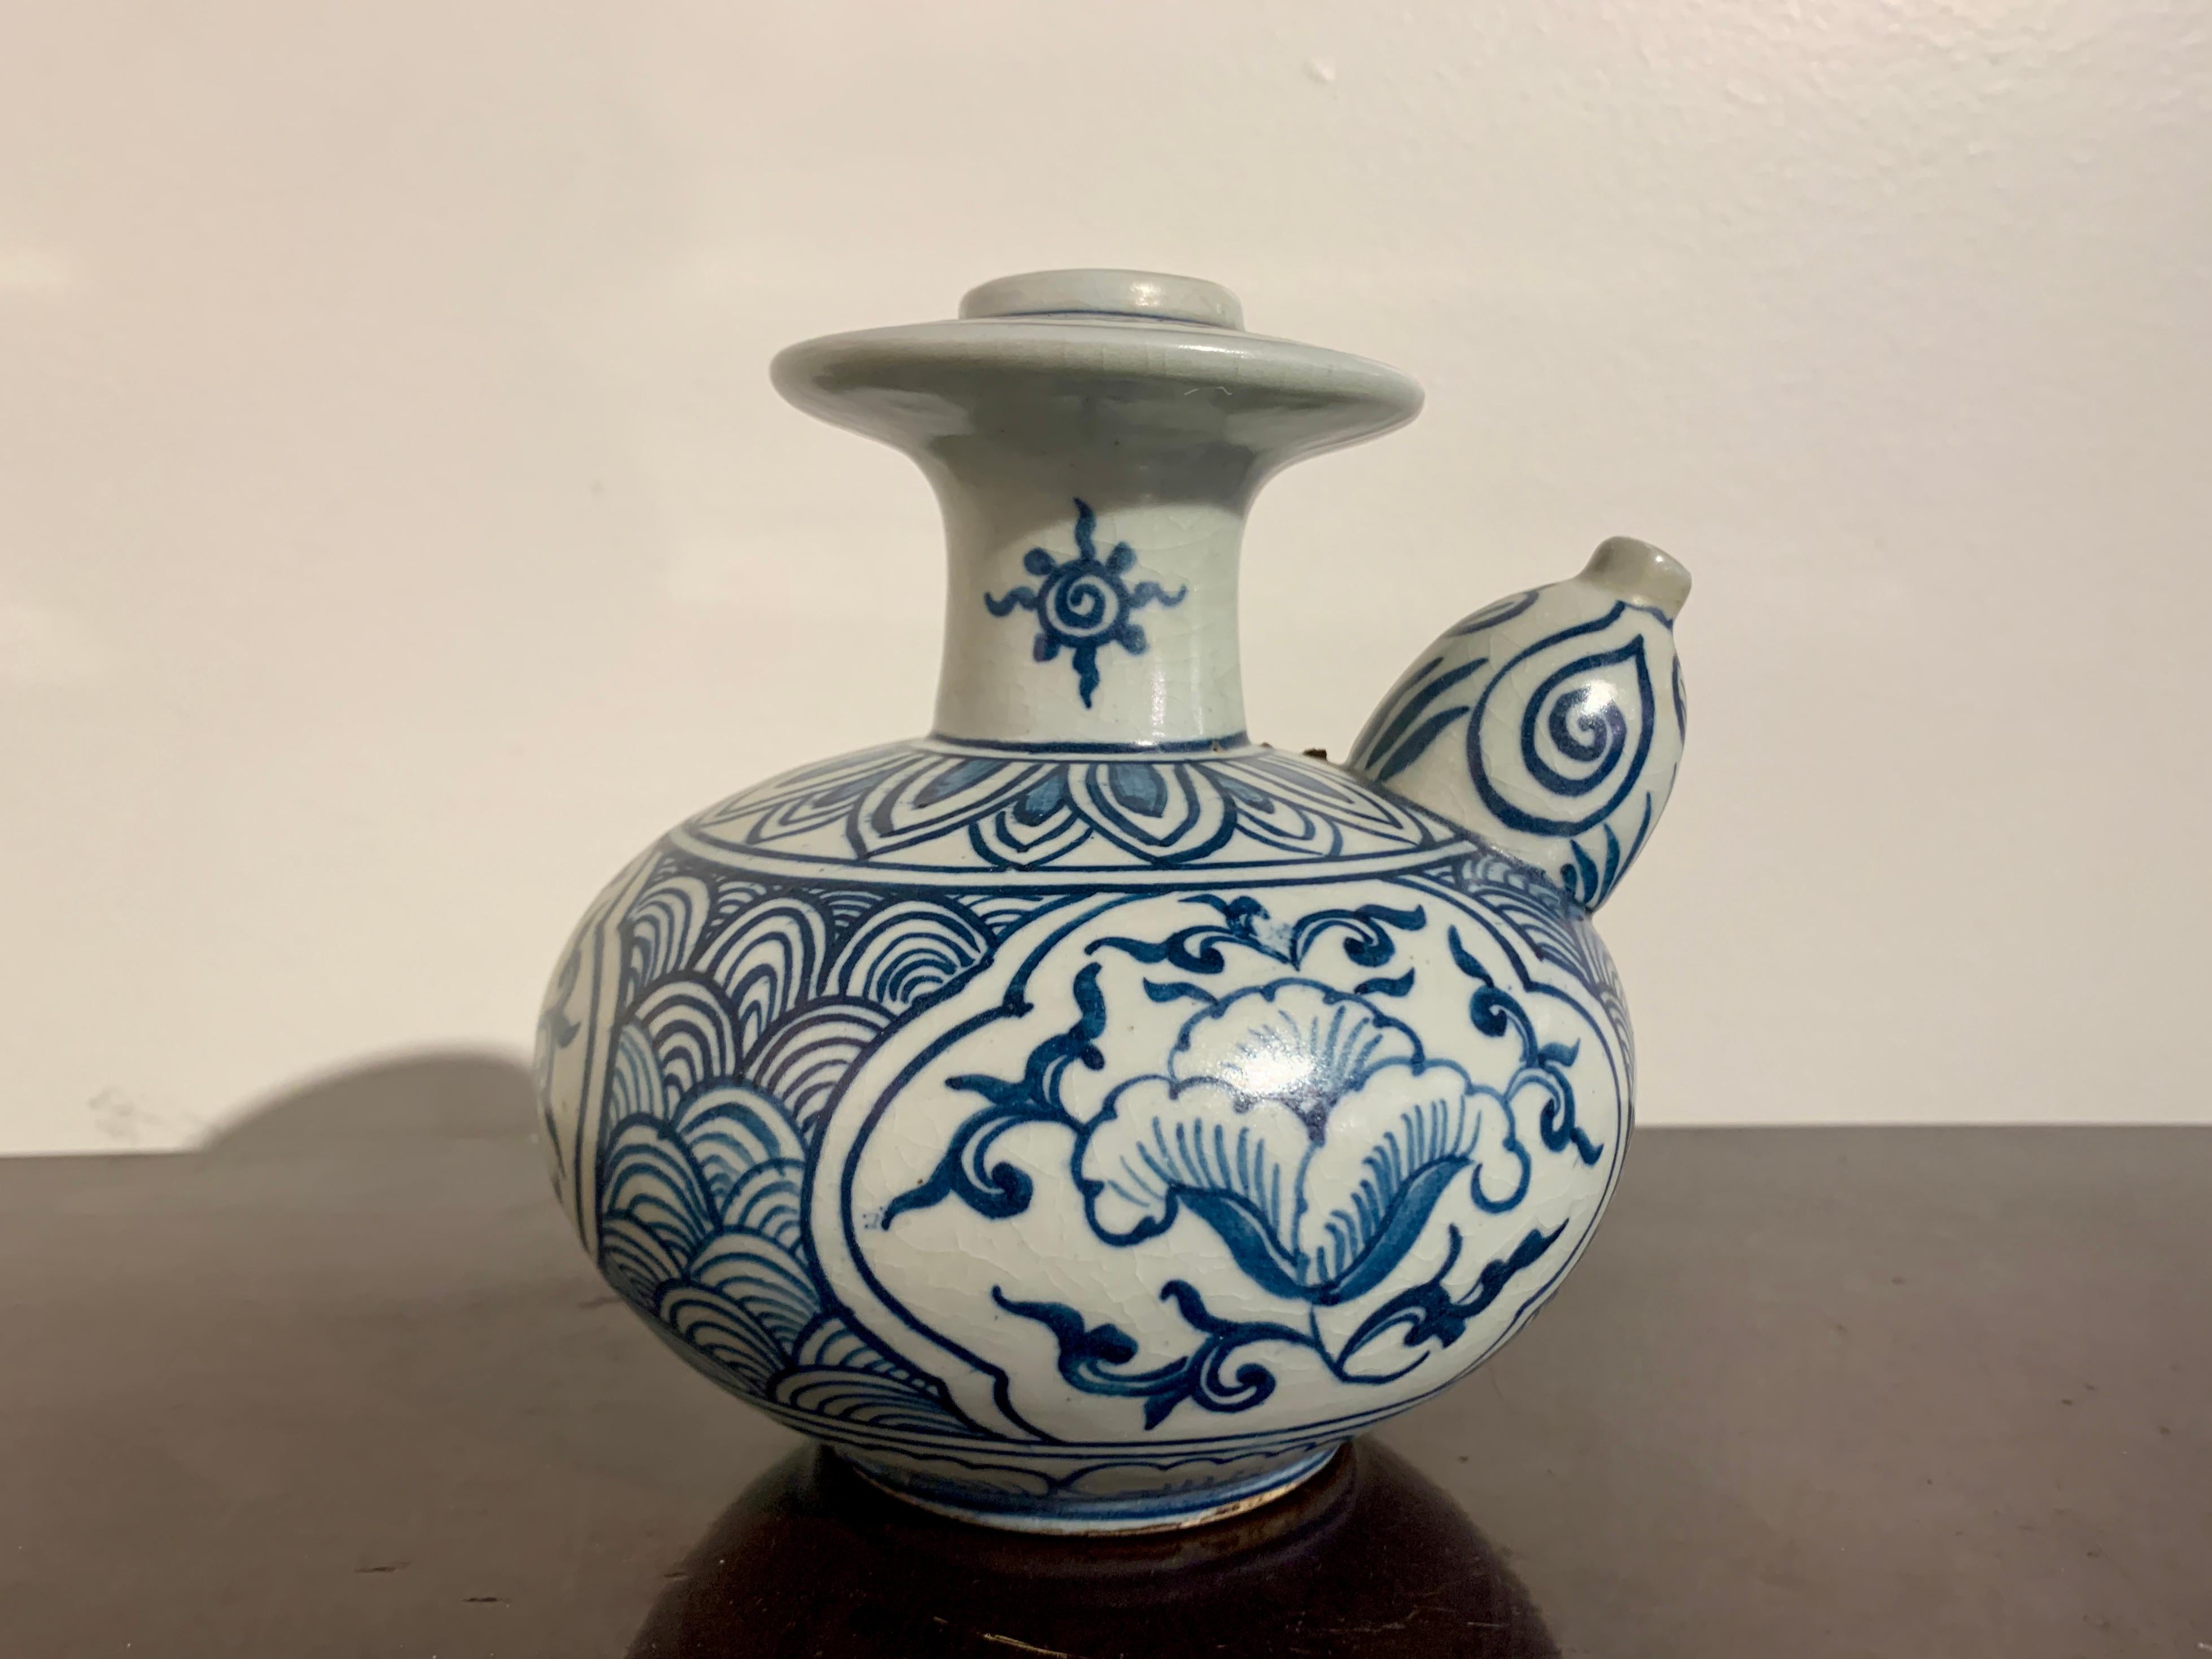 A charming small Vietnamese shipwreck porcelain kendi, or pouring vessel, with blue and white decoration, late 15th or early 16th century, Vietnam. 

The small kendi is heavily potted, with a squat body, short neck, flanged mouth, and a small yet